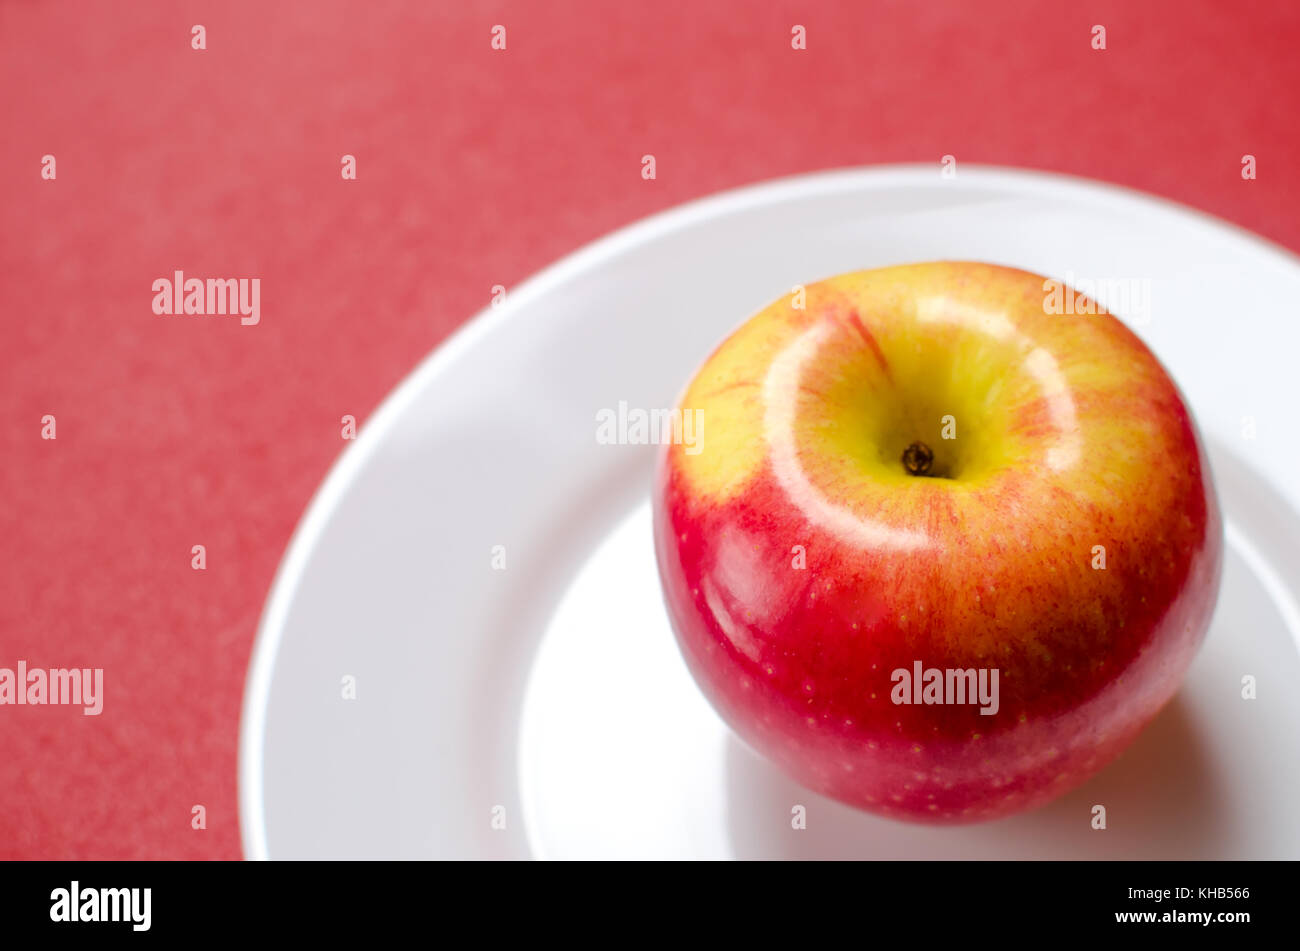 ripe red-yellow apple on a white plate against the red background Stock Photo